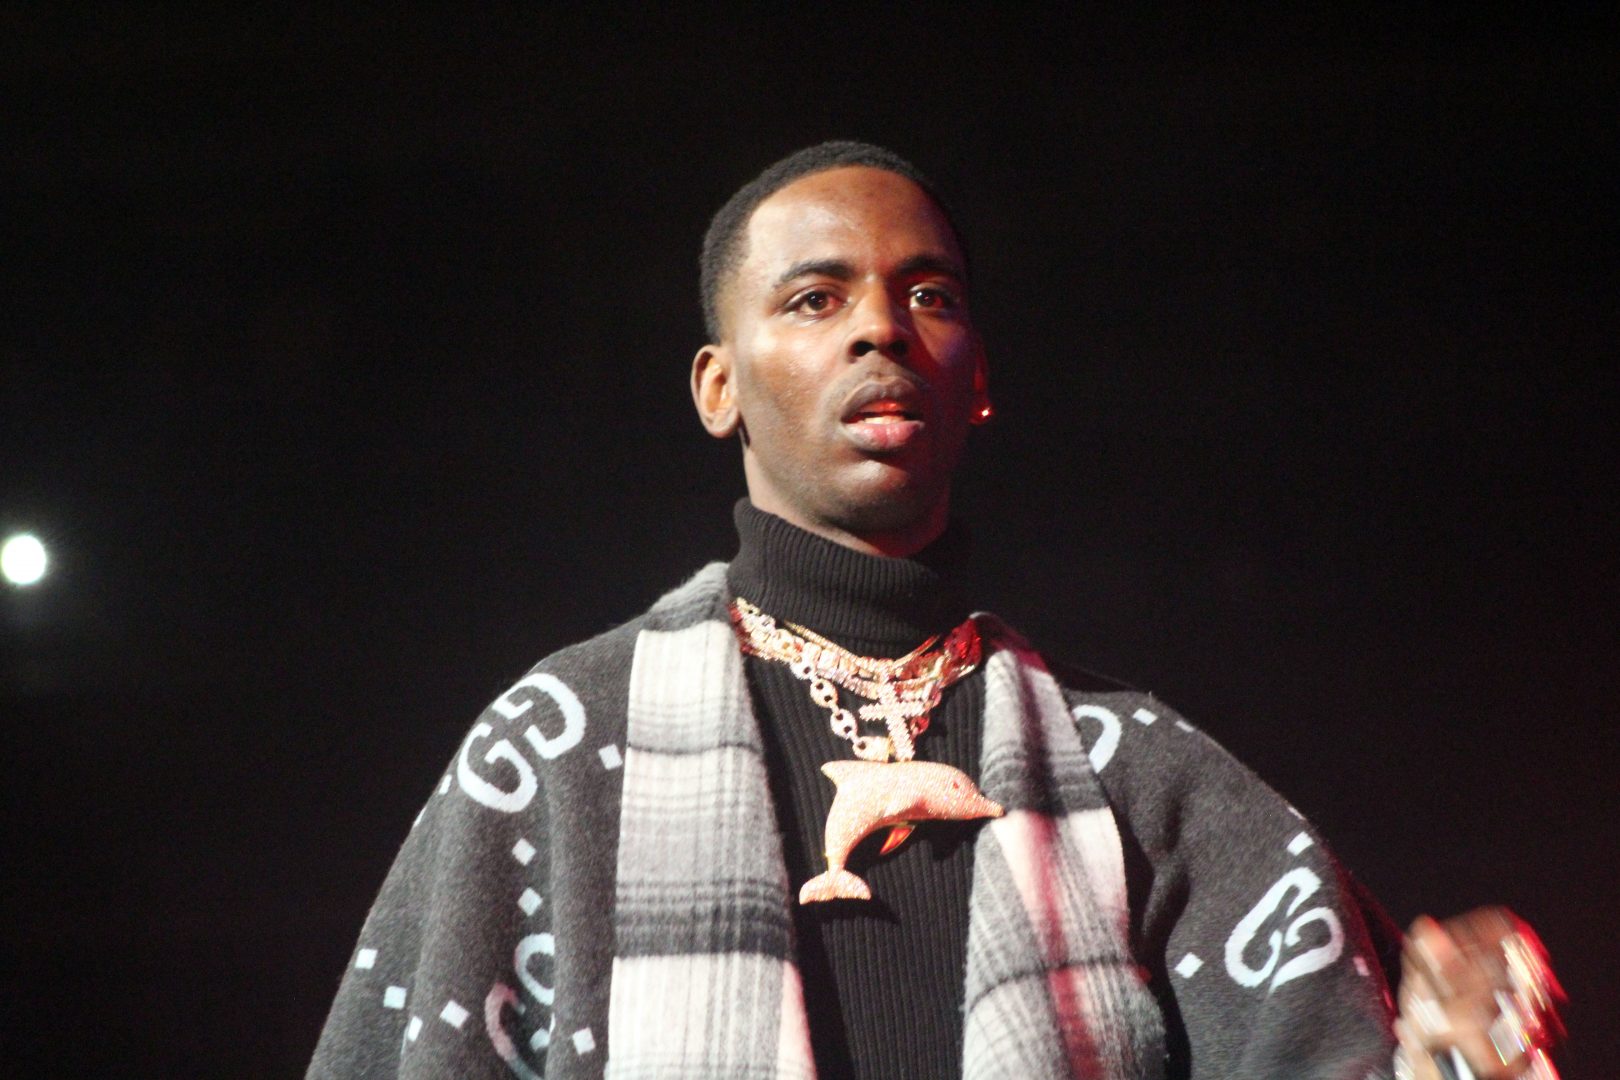 Man who worked on Young Dolph memorial shot and killed